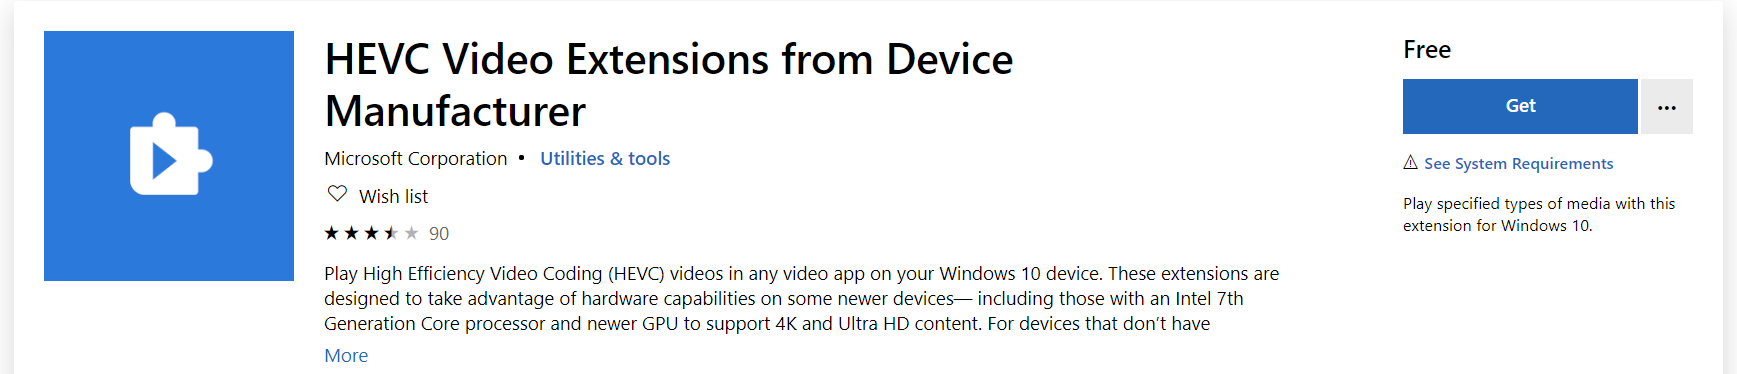 Install the HEVC Video Extension for Device Manufacturer